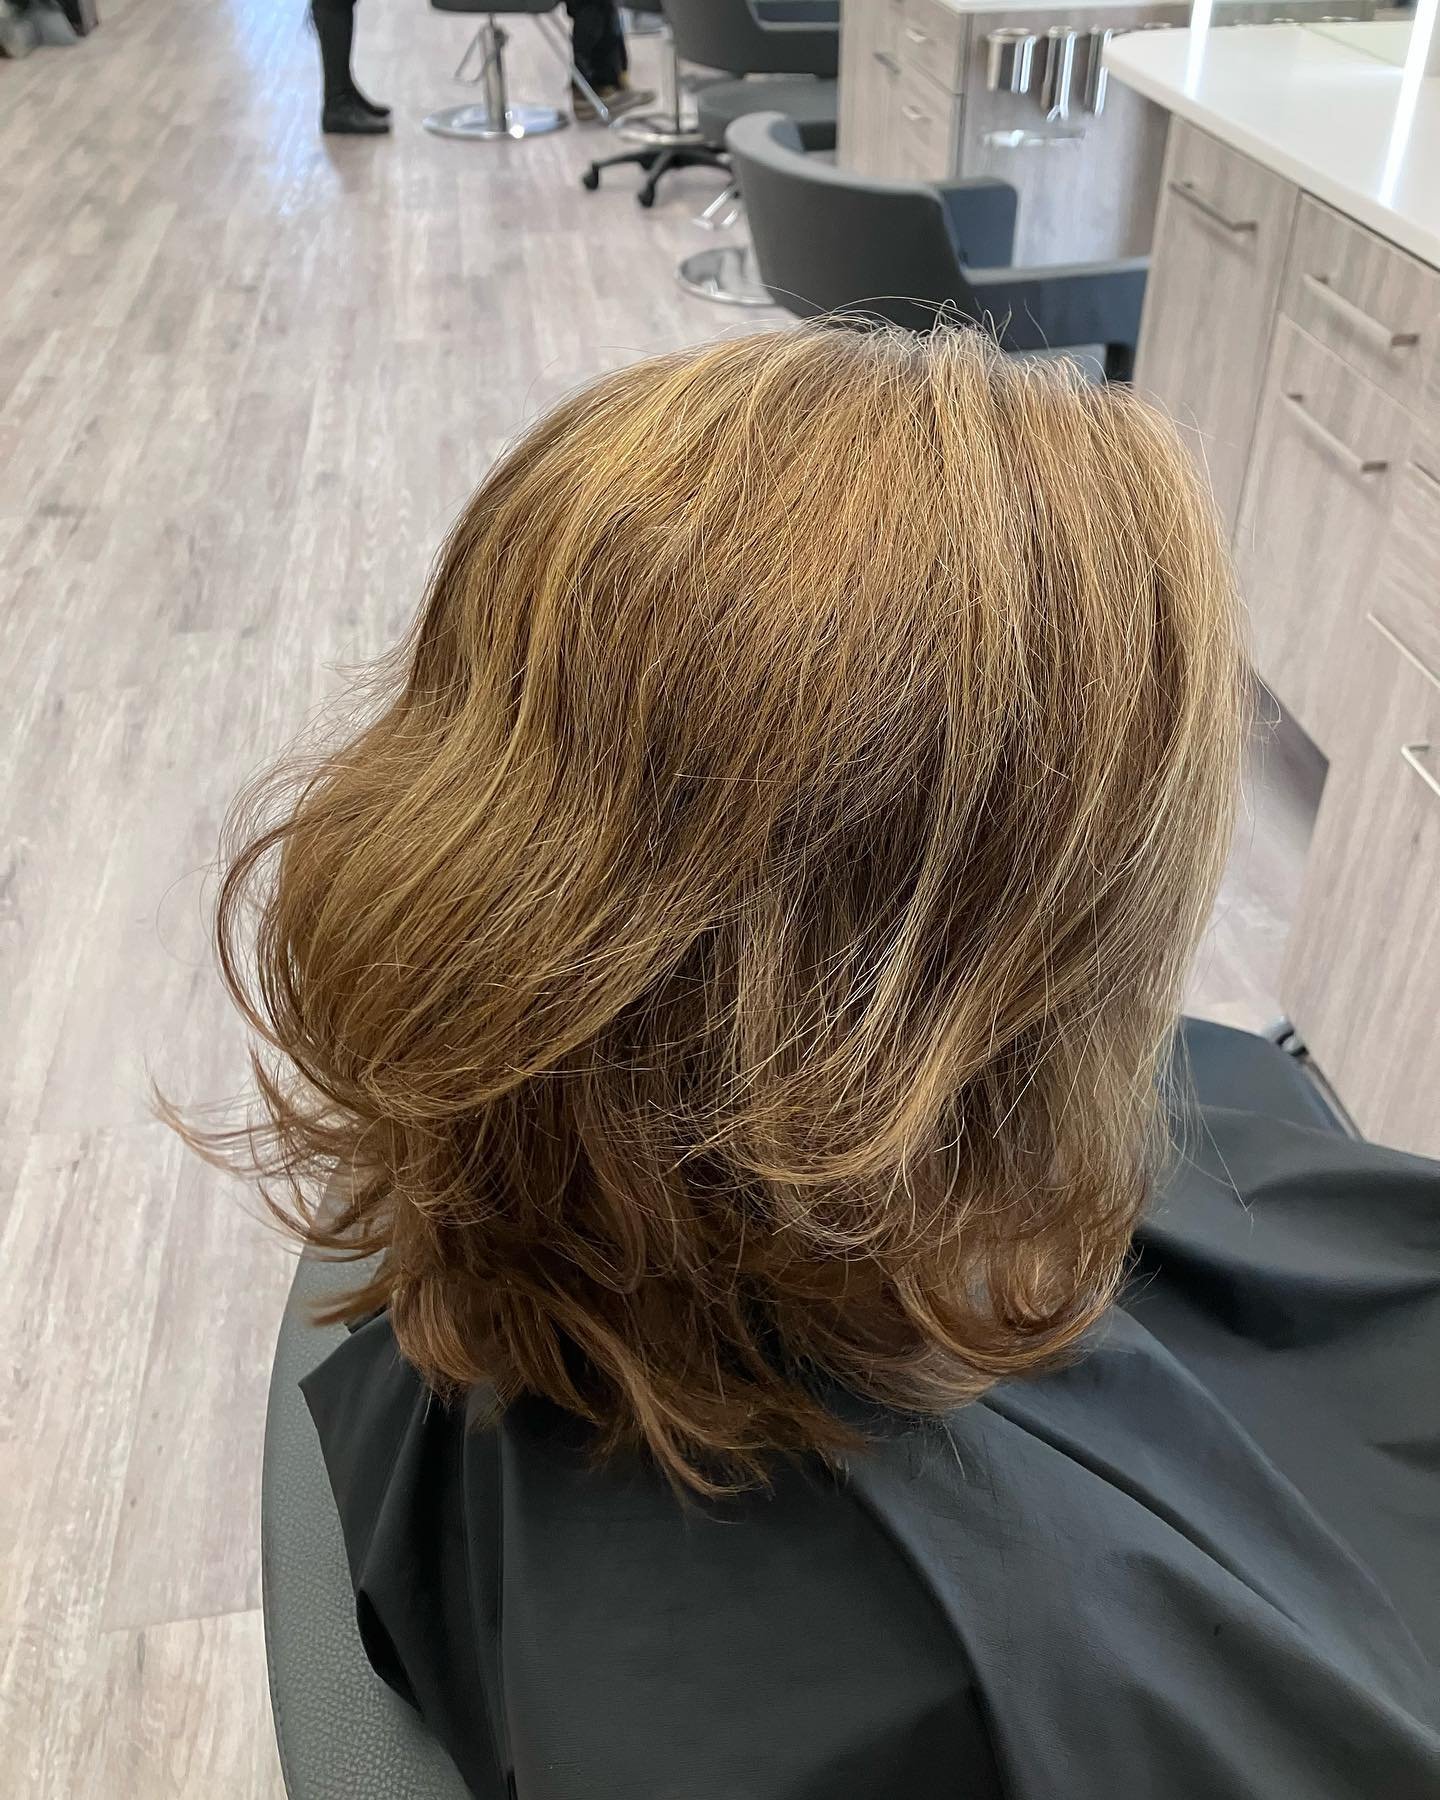 Ready for a change? Let's step it up with some depth and a new cut! 💇&zwj;♀️✨ #HairTransformation #NewLook #HairGoals  #anchoragehaircolorist #anchoragehaircuts #alaskahairstylists #alaskahairsalons #alaskahairdresser #alaskahairsalon #alaskahairsty